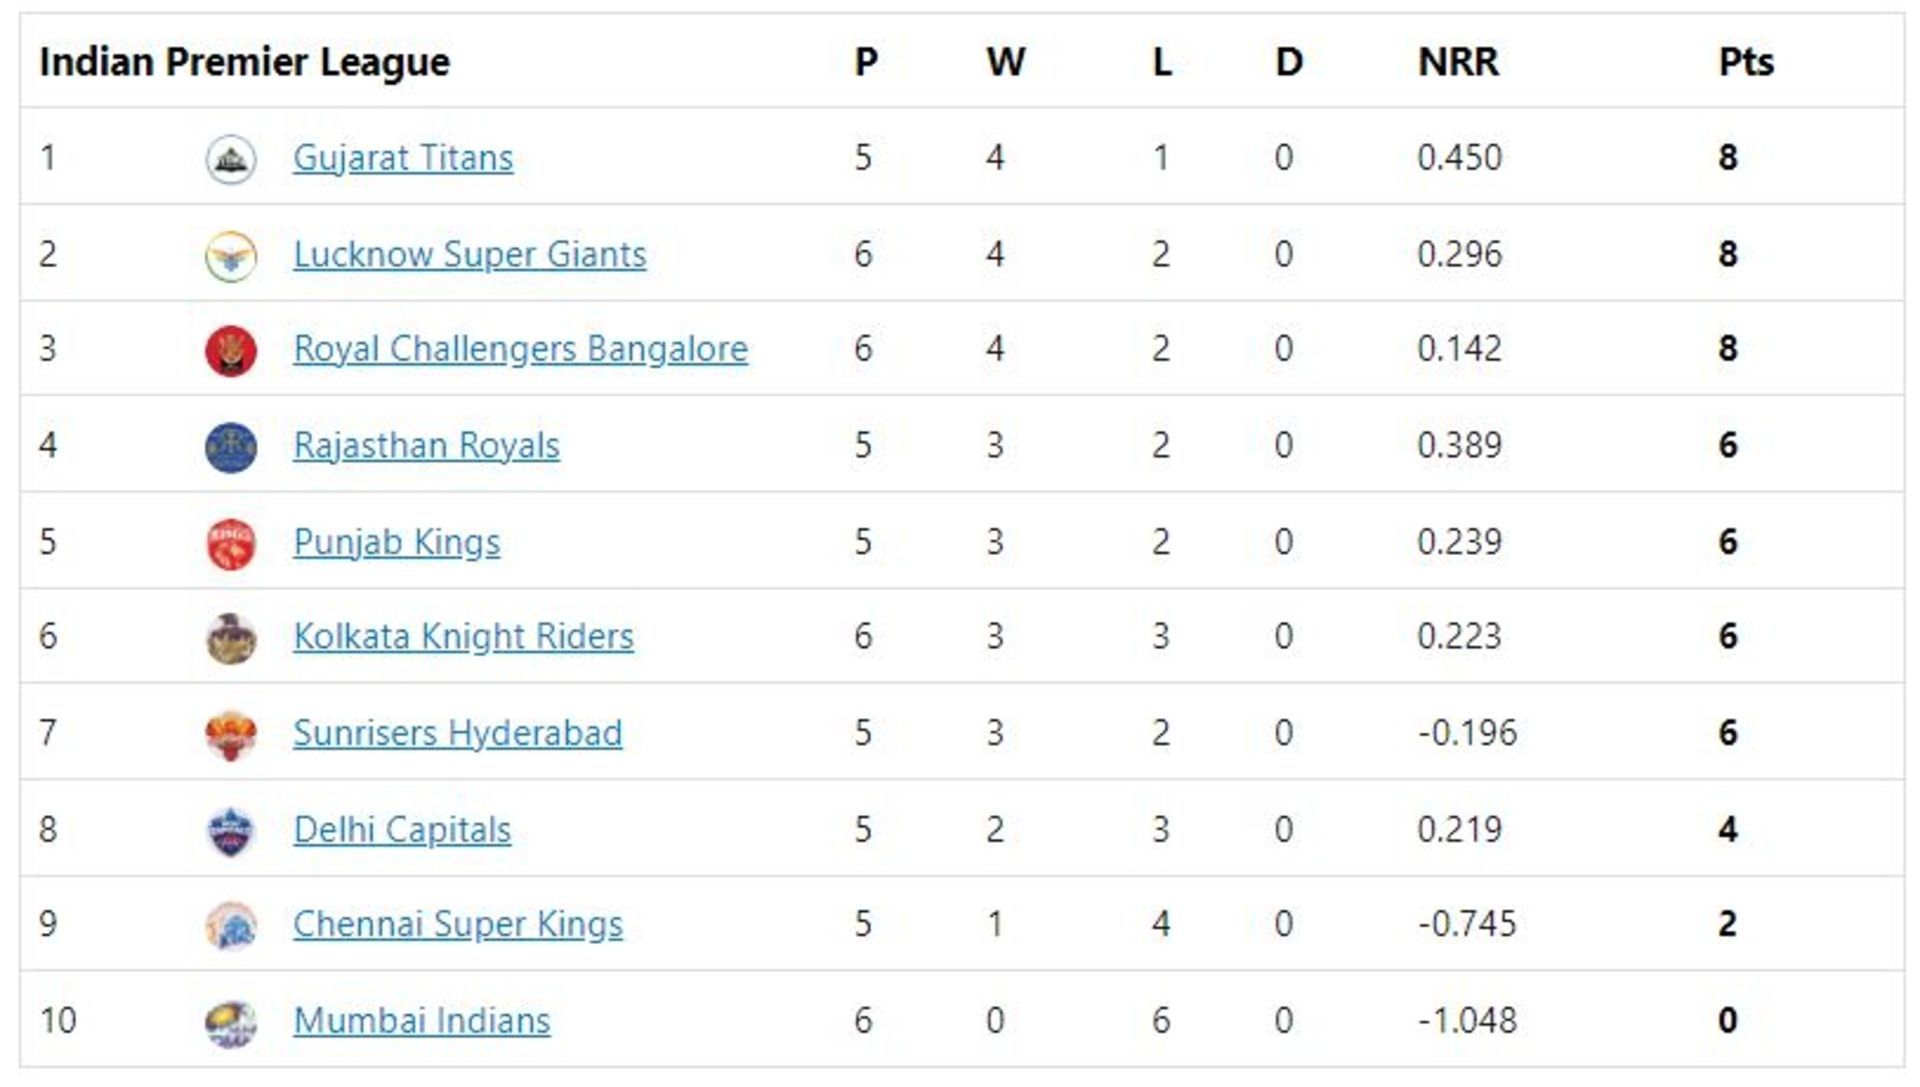 RCB and DC drift apart in the points table